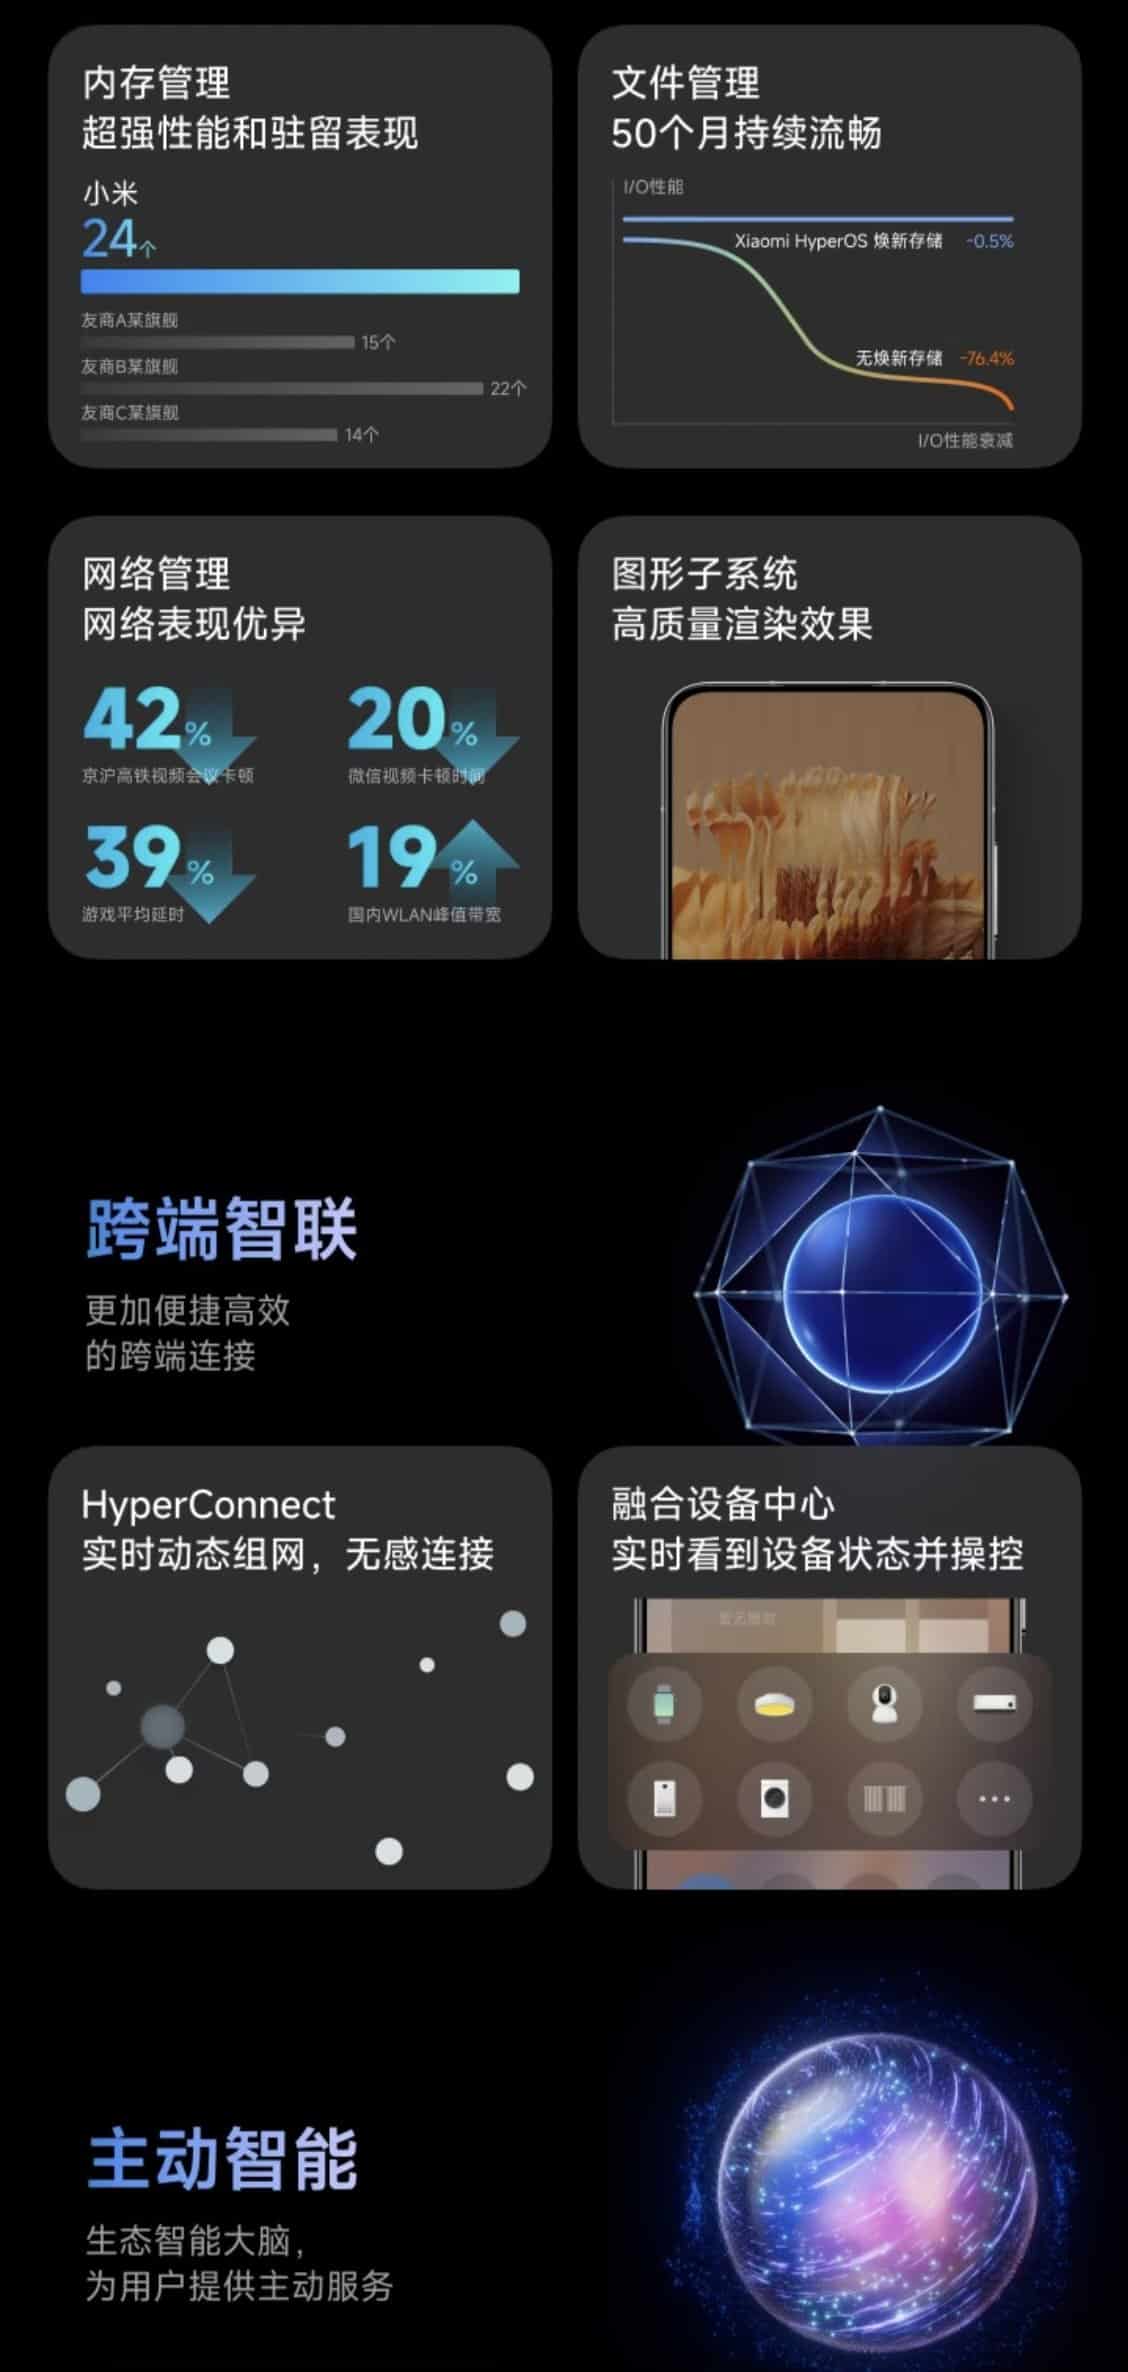 Xiaomi HyperOS announced in China, check out the detail here - The Tech ...